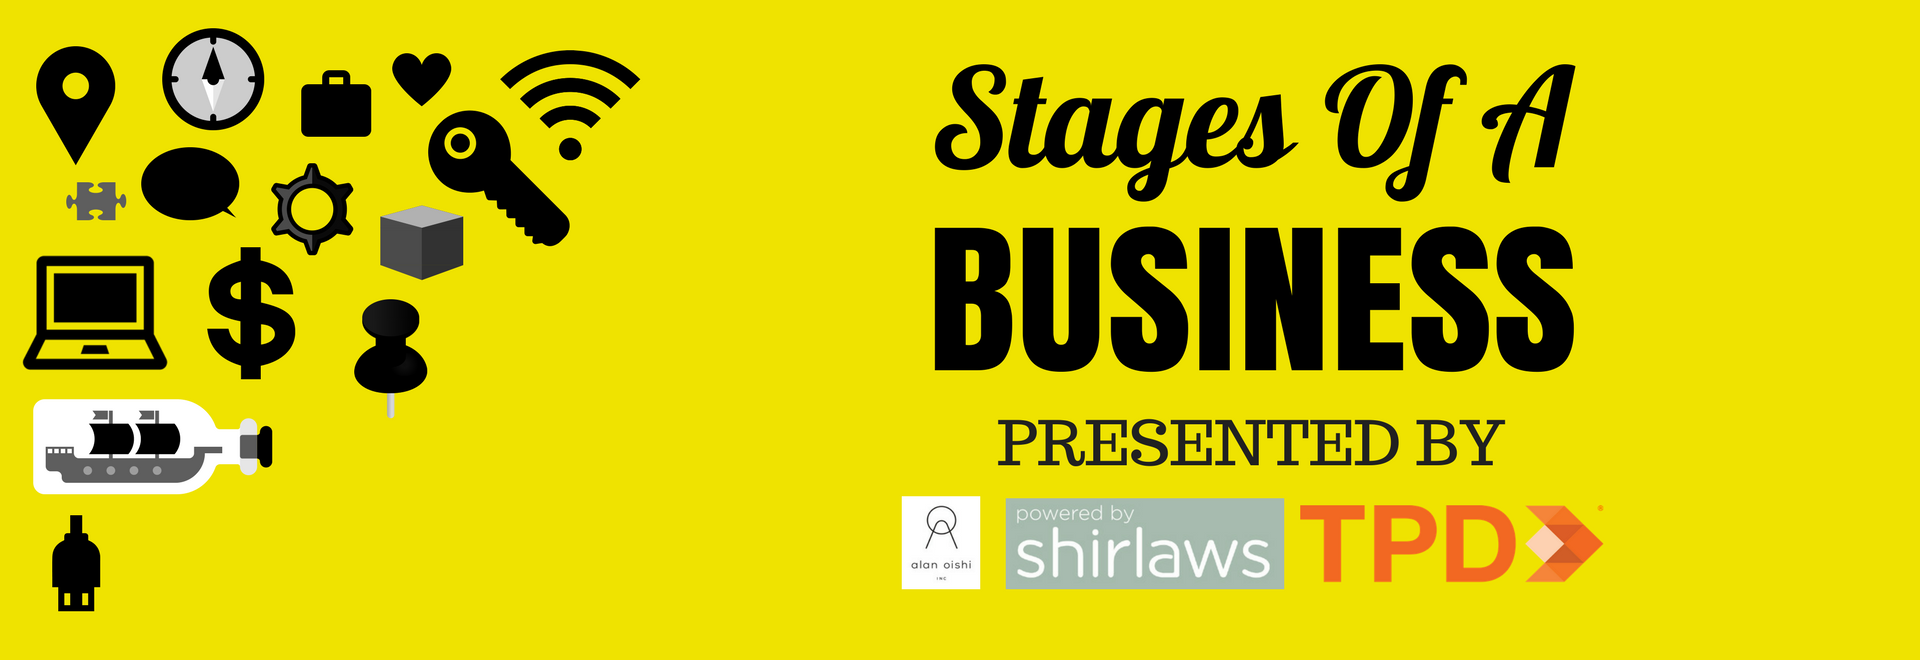 TPD.com | Online Training - Stages of a Business